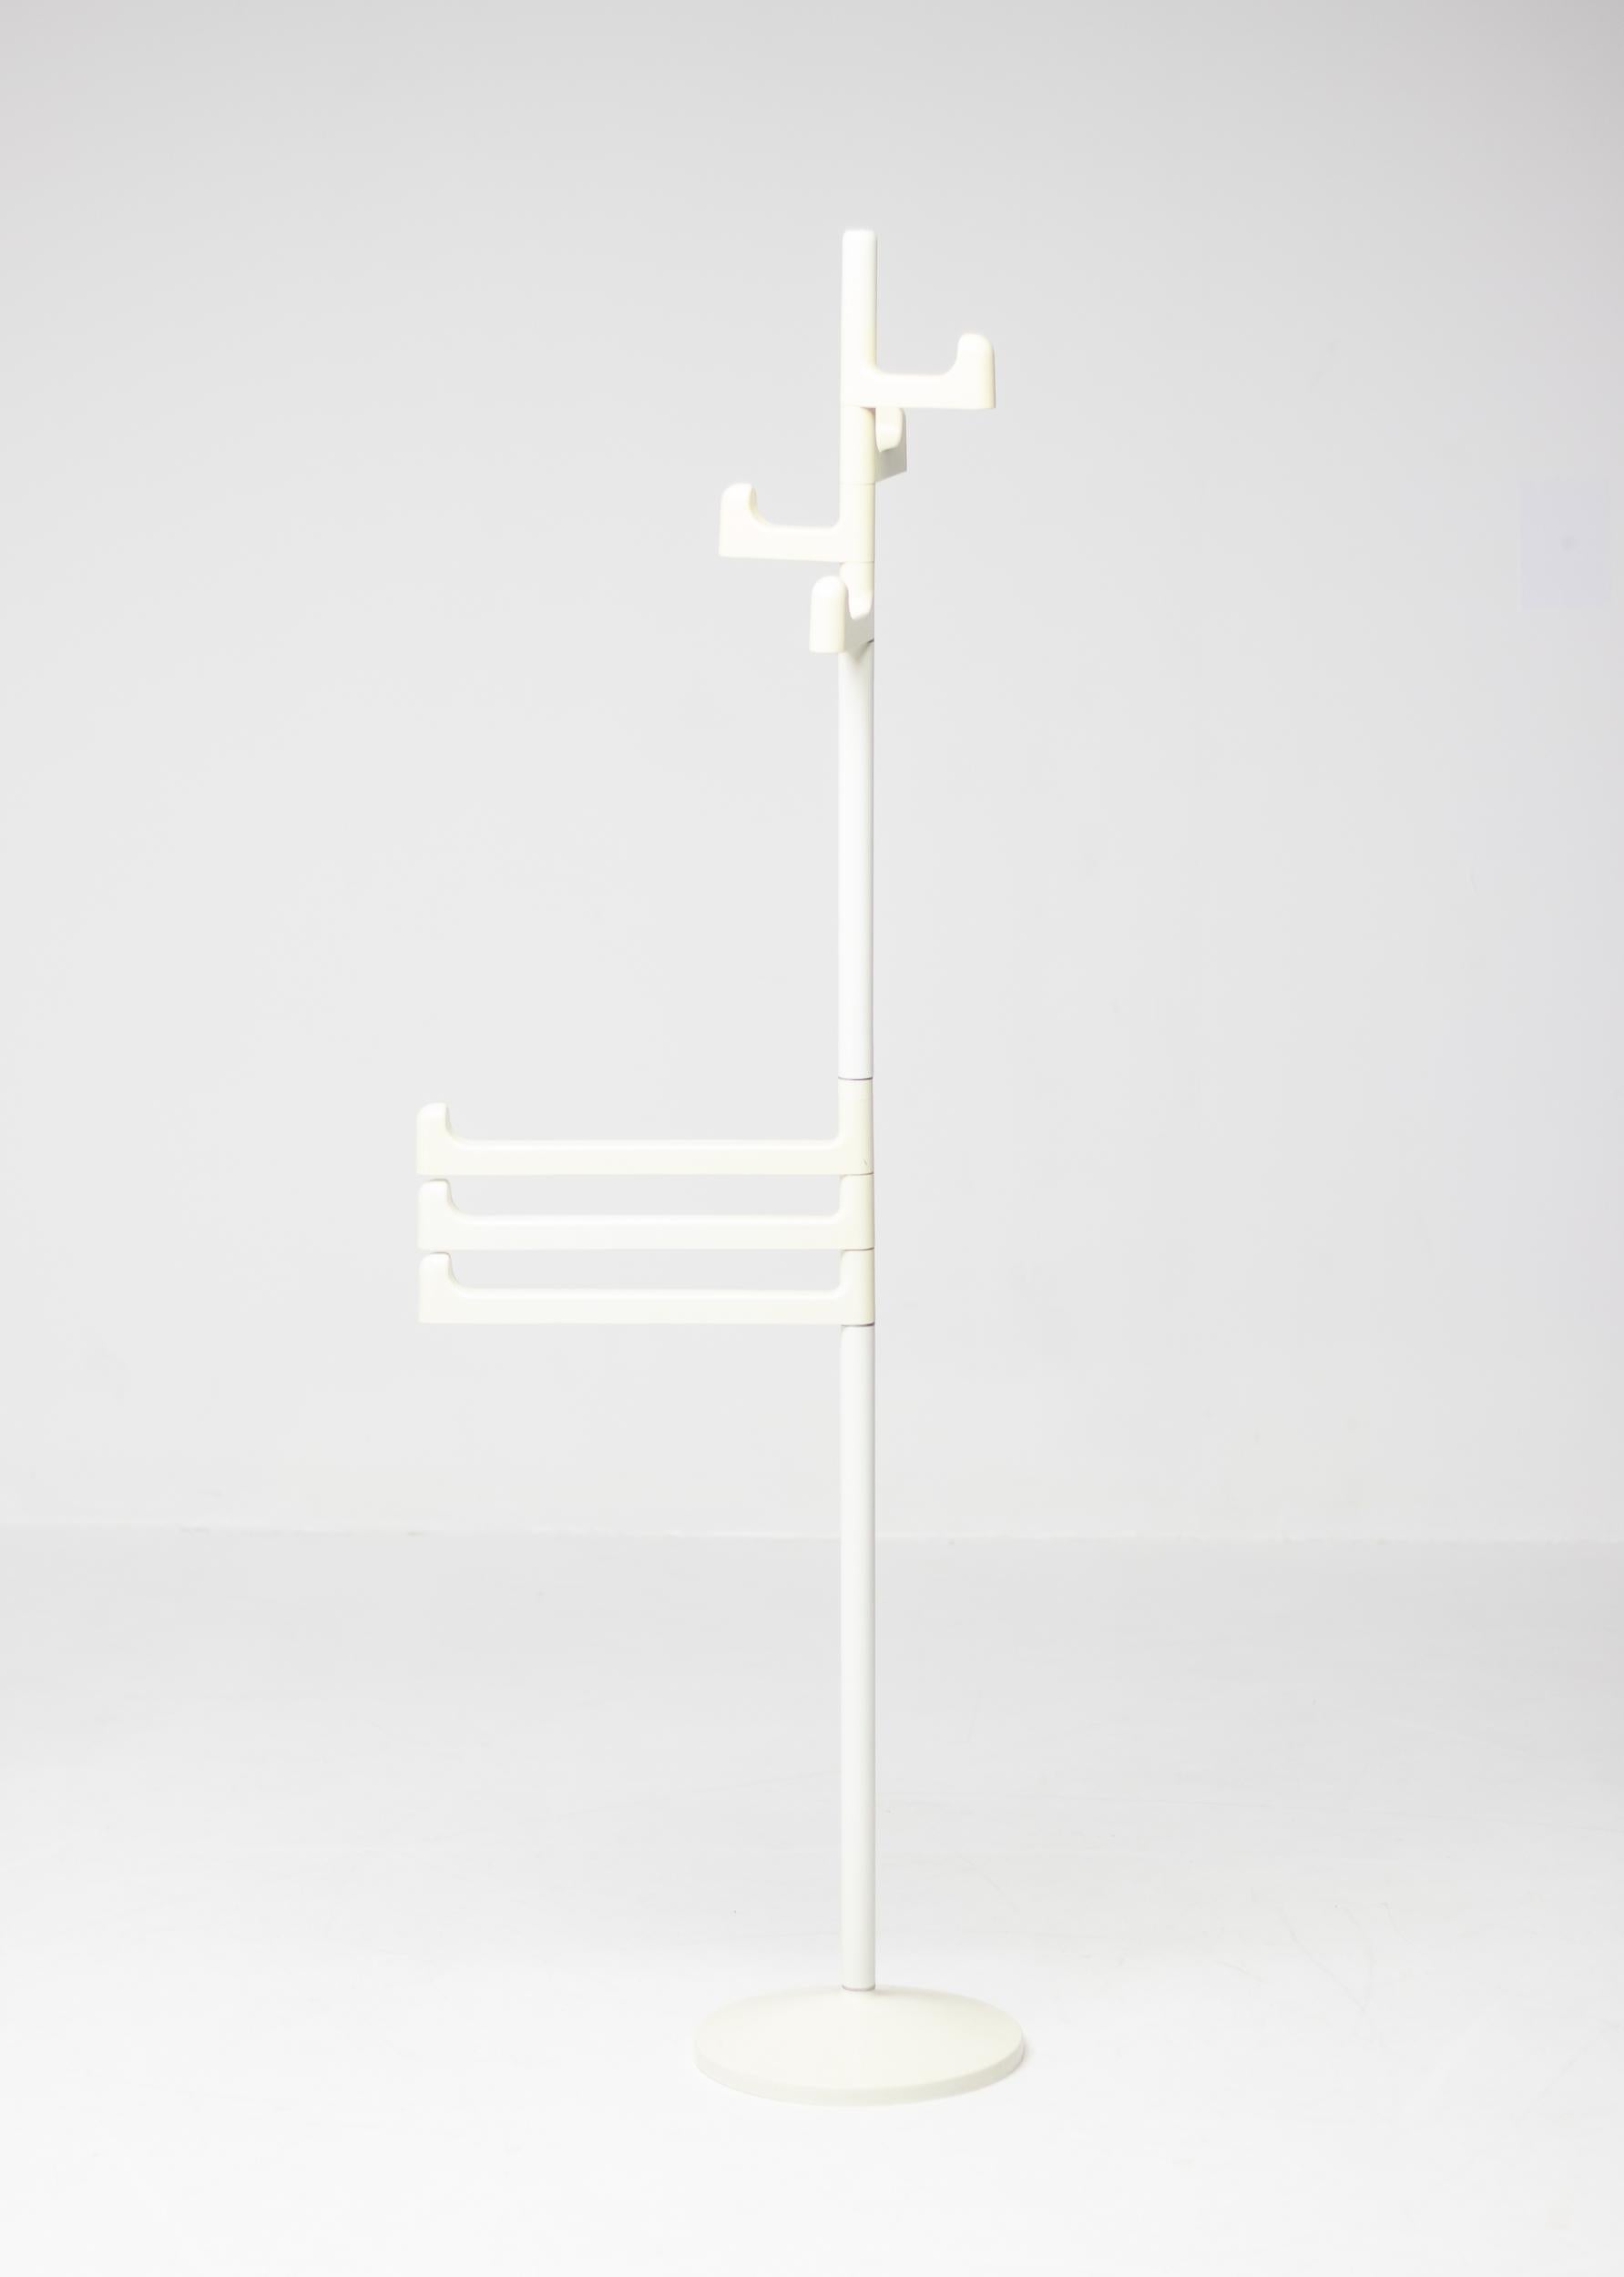 Elegant Italian towel rack or coat rack in plastic coated steel and ABS, designed by Makio Hasuike for Gedy.
The piece has seven useful arms. The bottom three are long and spin freely on the shaft for placement wherever you need them. The top four